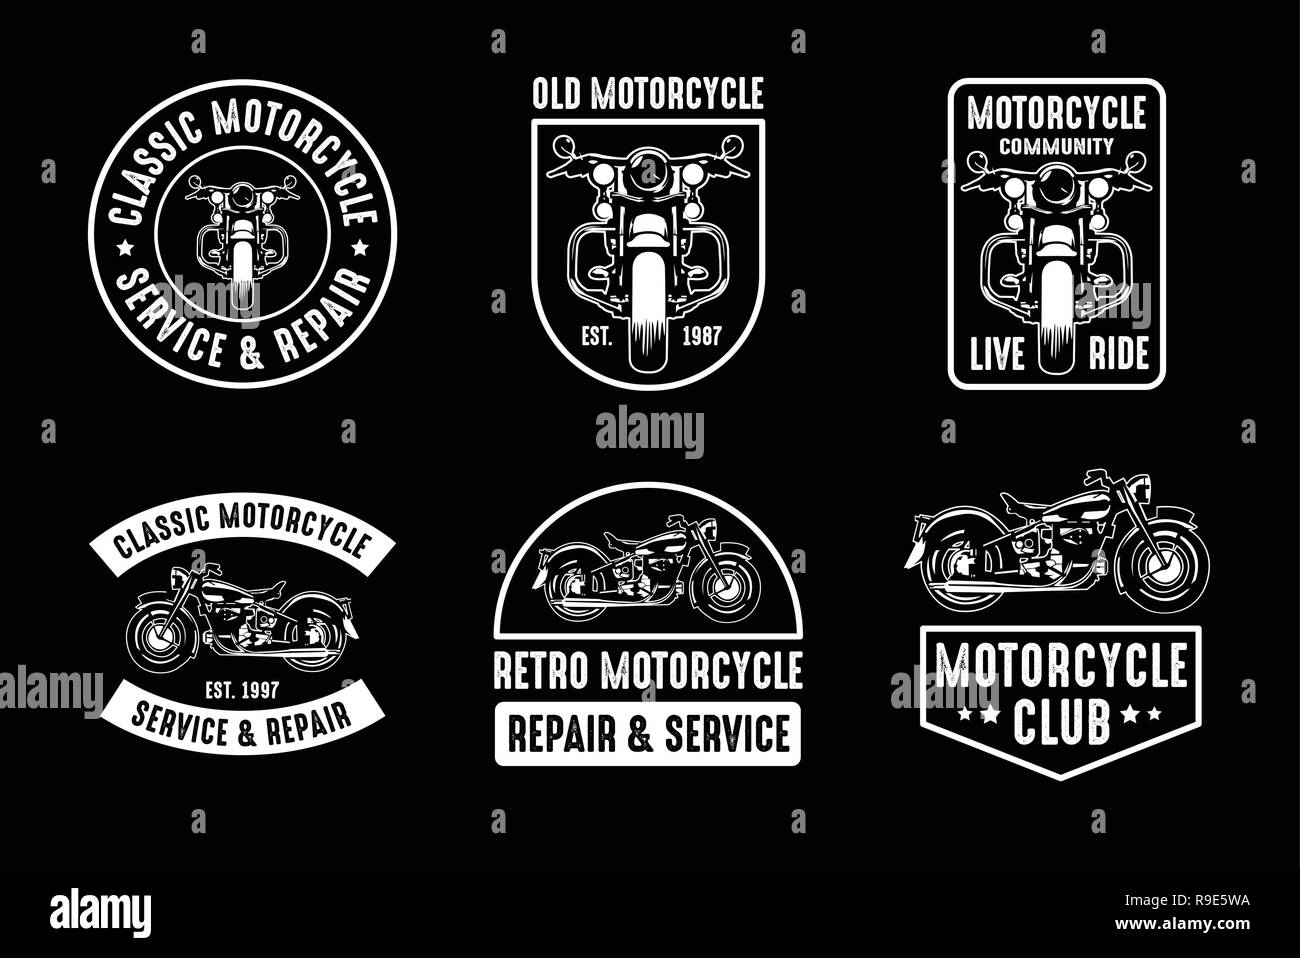 Motorcycle badge and logo, good for print best vector Stock Vector